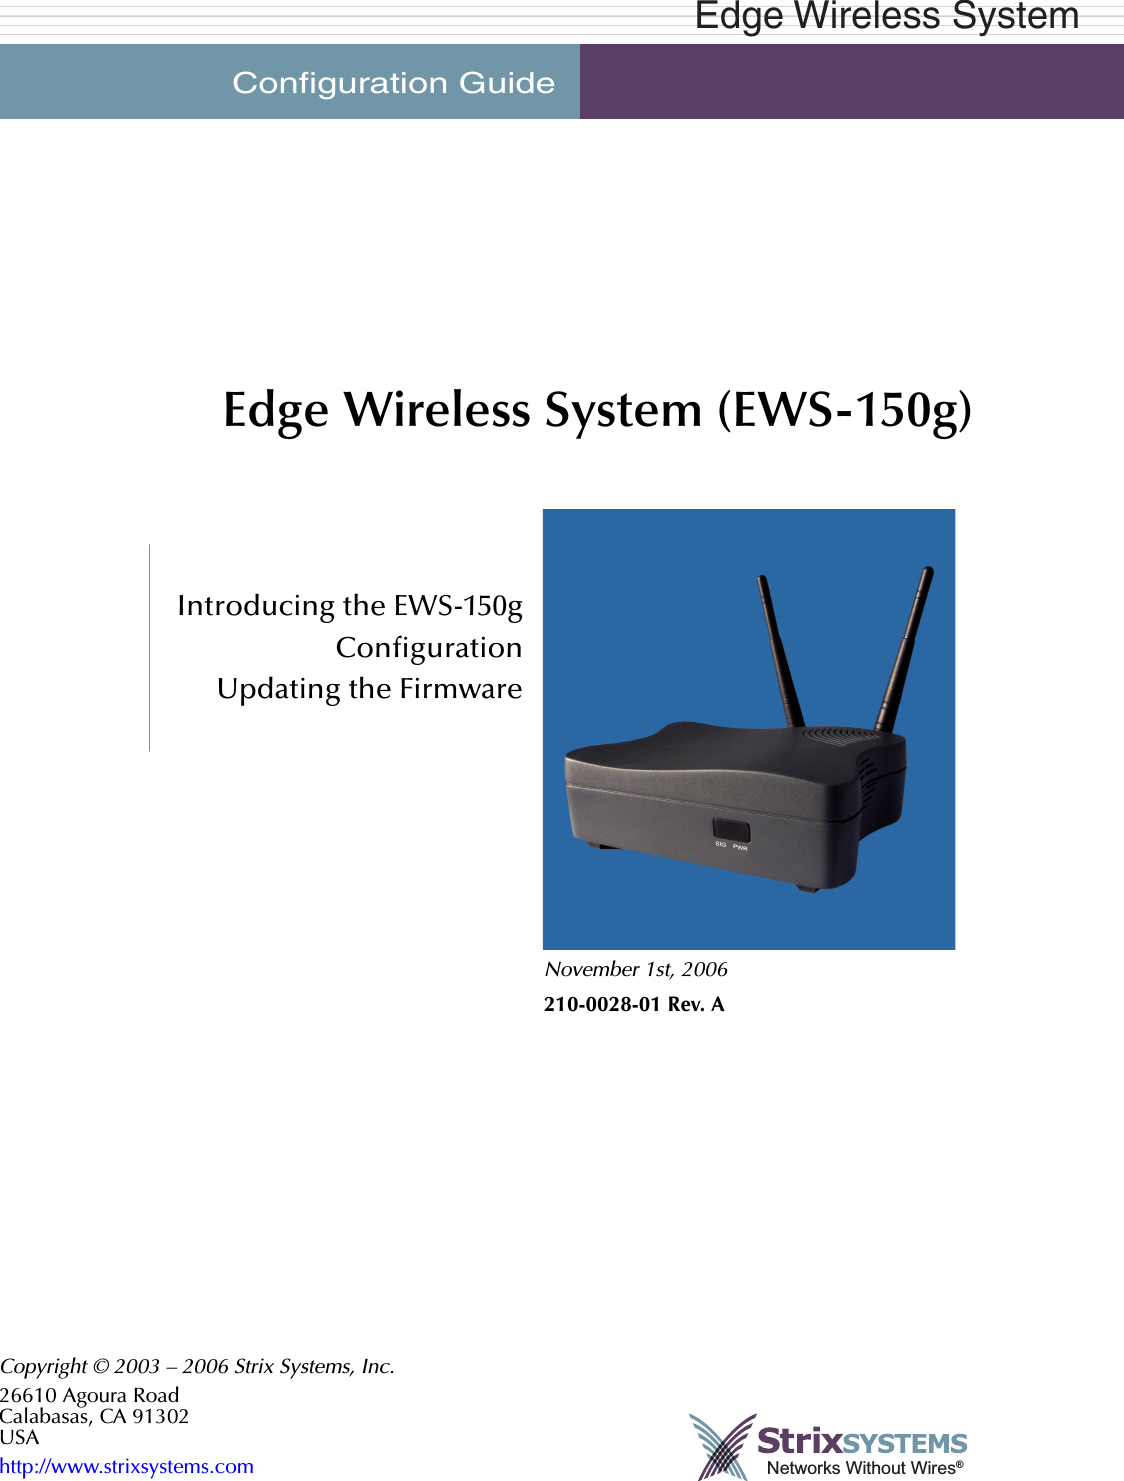 Configuration GuideEdge Wireless SystemFront MatterEdge Wireless System (EWS-150g)Introducing the EWS-150gConfigurationUpdating the FirmwareNovember 1st, 2006210-0028-01 Rev. ACopyright © 2003 – 2006 Strix Systems, Inc.26610 Agoura RoadCalabasas, CA 91302USAhttp://www.strixsystems.com Networks Without Wires®